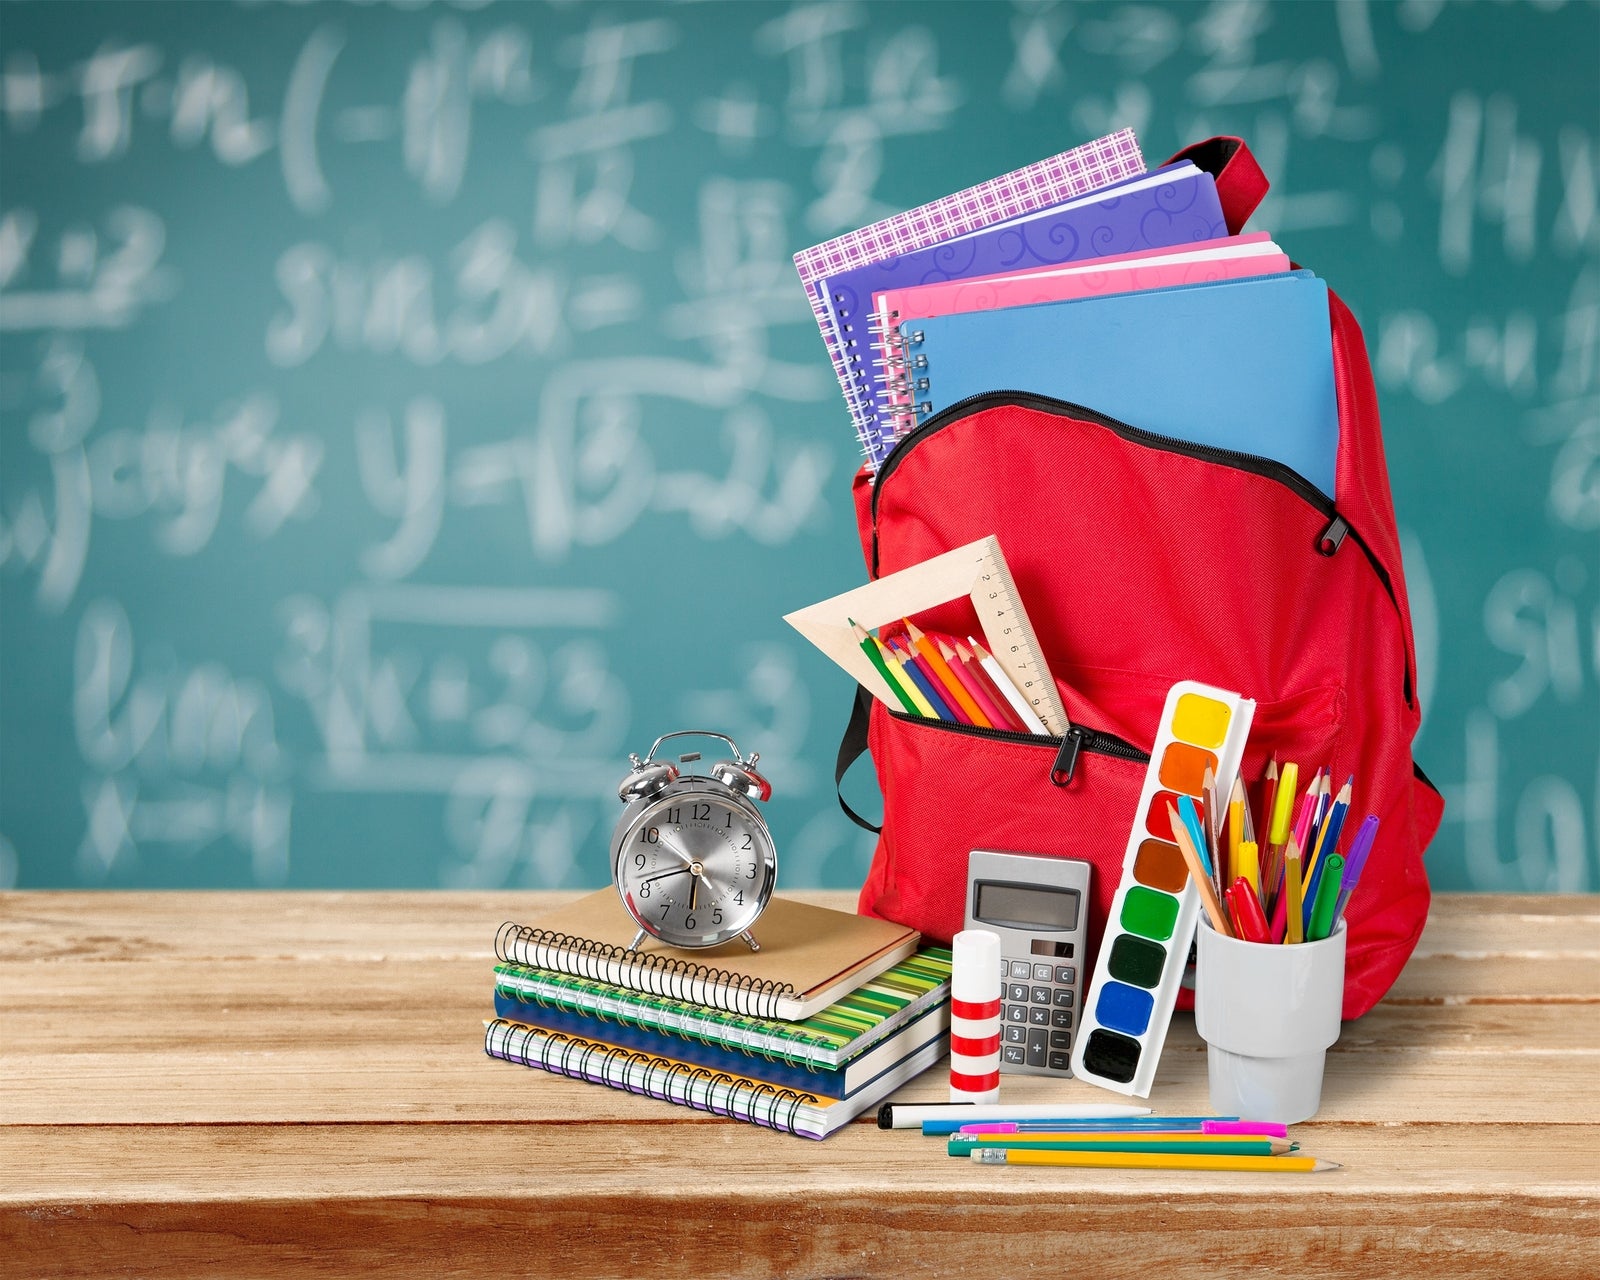 5 ways to ease back into your school schedule - WHYY